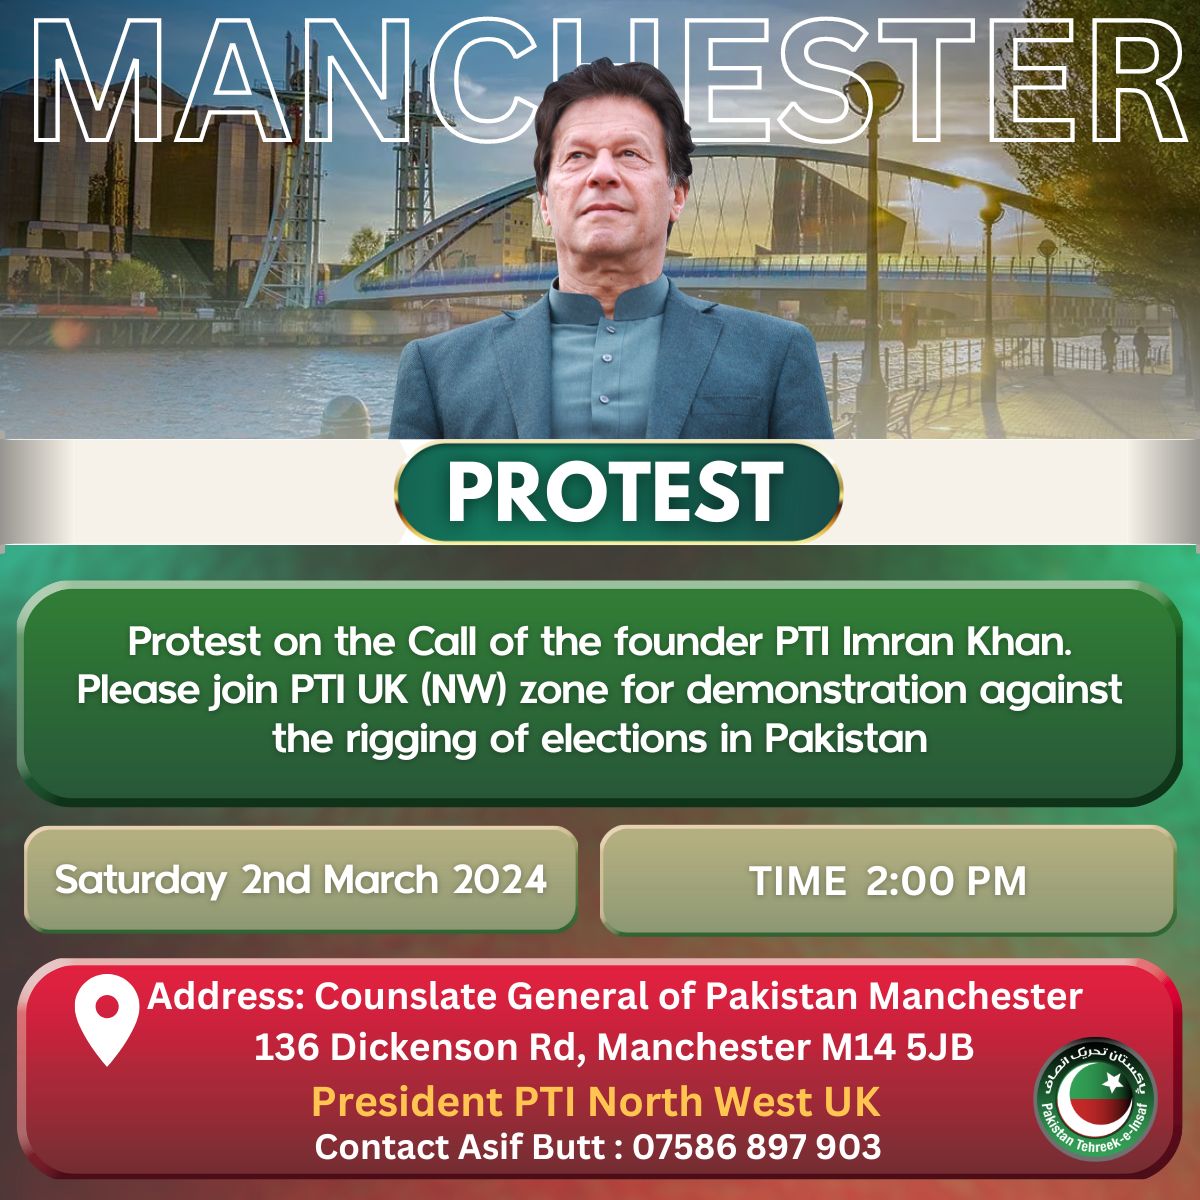 Protest on the Call of the founder PTI Imran Khan. Demonstration against the rigging of elections in Pakistan on
Saturday 2nd March 2024. Time 2:00 PM.
Address: Counslate General of Pakistan Manchester
136 Dickenson Rd, Manchester M14 5JB.
#OverseasPakistanis